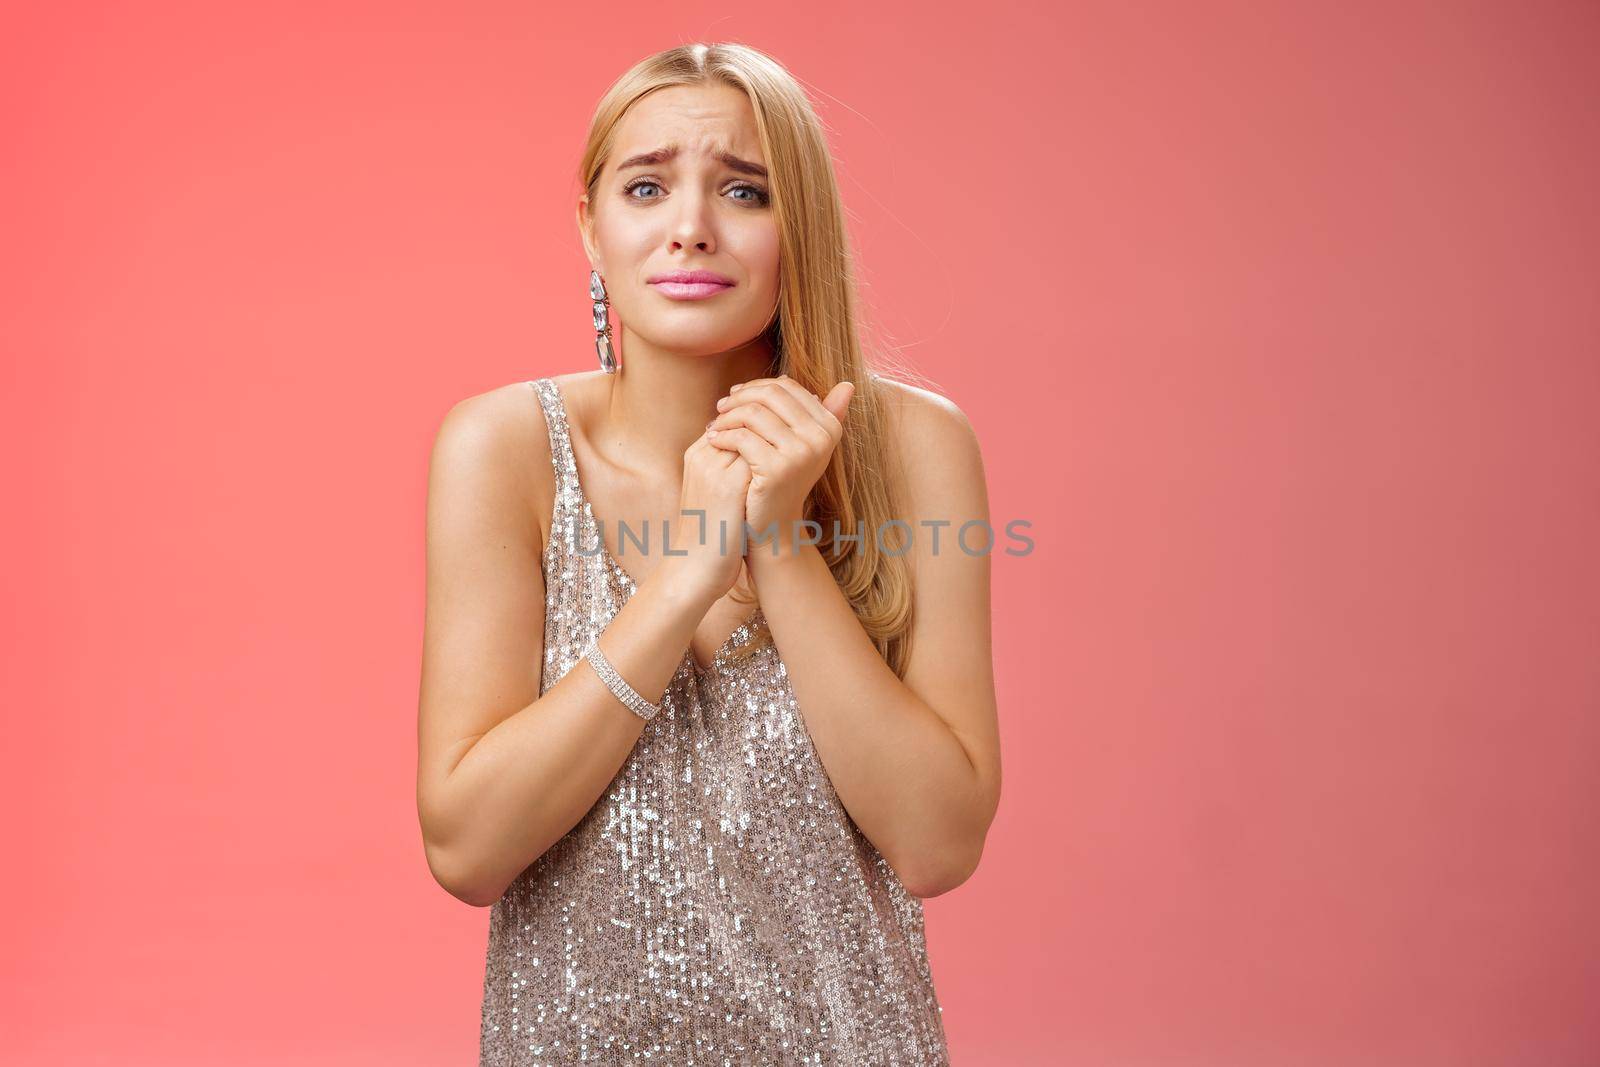 Sad pity charming blond european hospitable woman feel empathy touching upsetting story press palms together heart frowning crying sorry for friend, standing in silver dress red background.